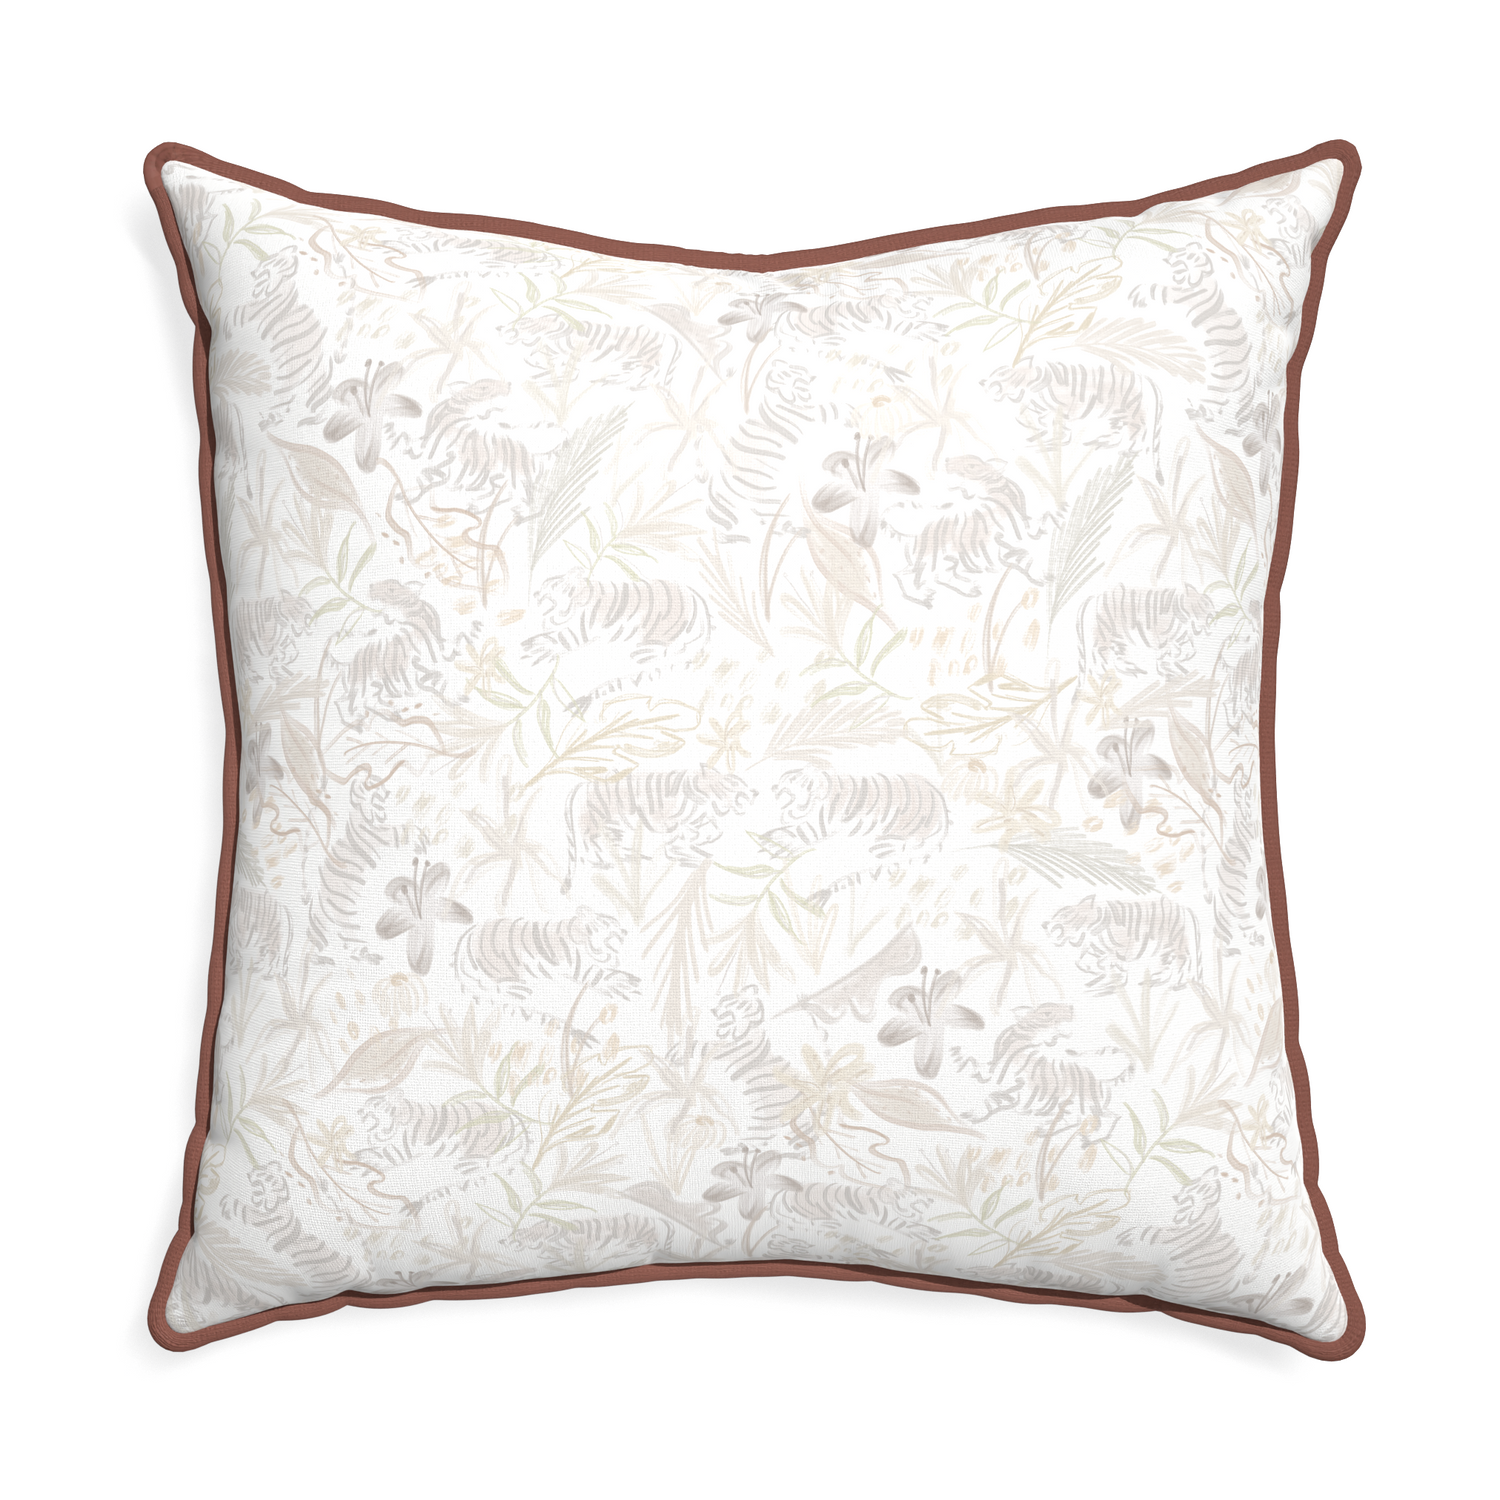 Euro-sham frida sand custom beige chinoiserie tigerpillow with w piping on white background